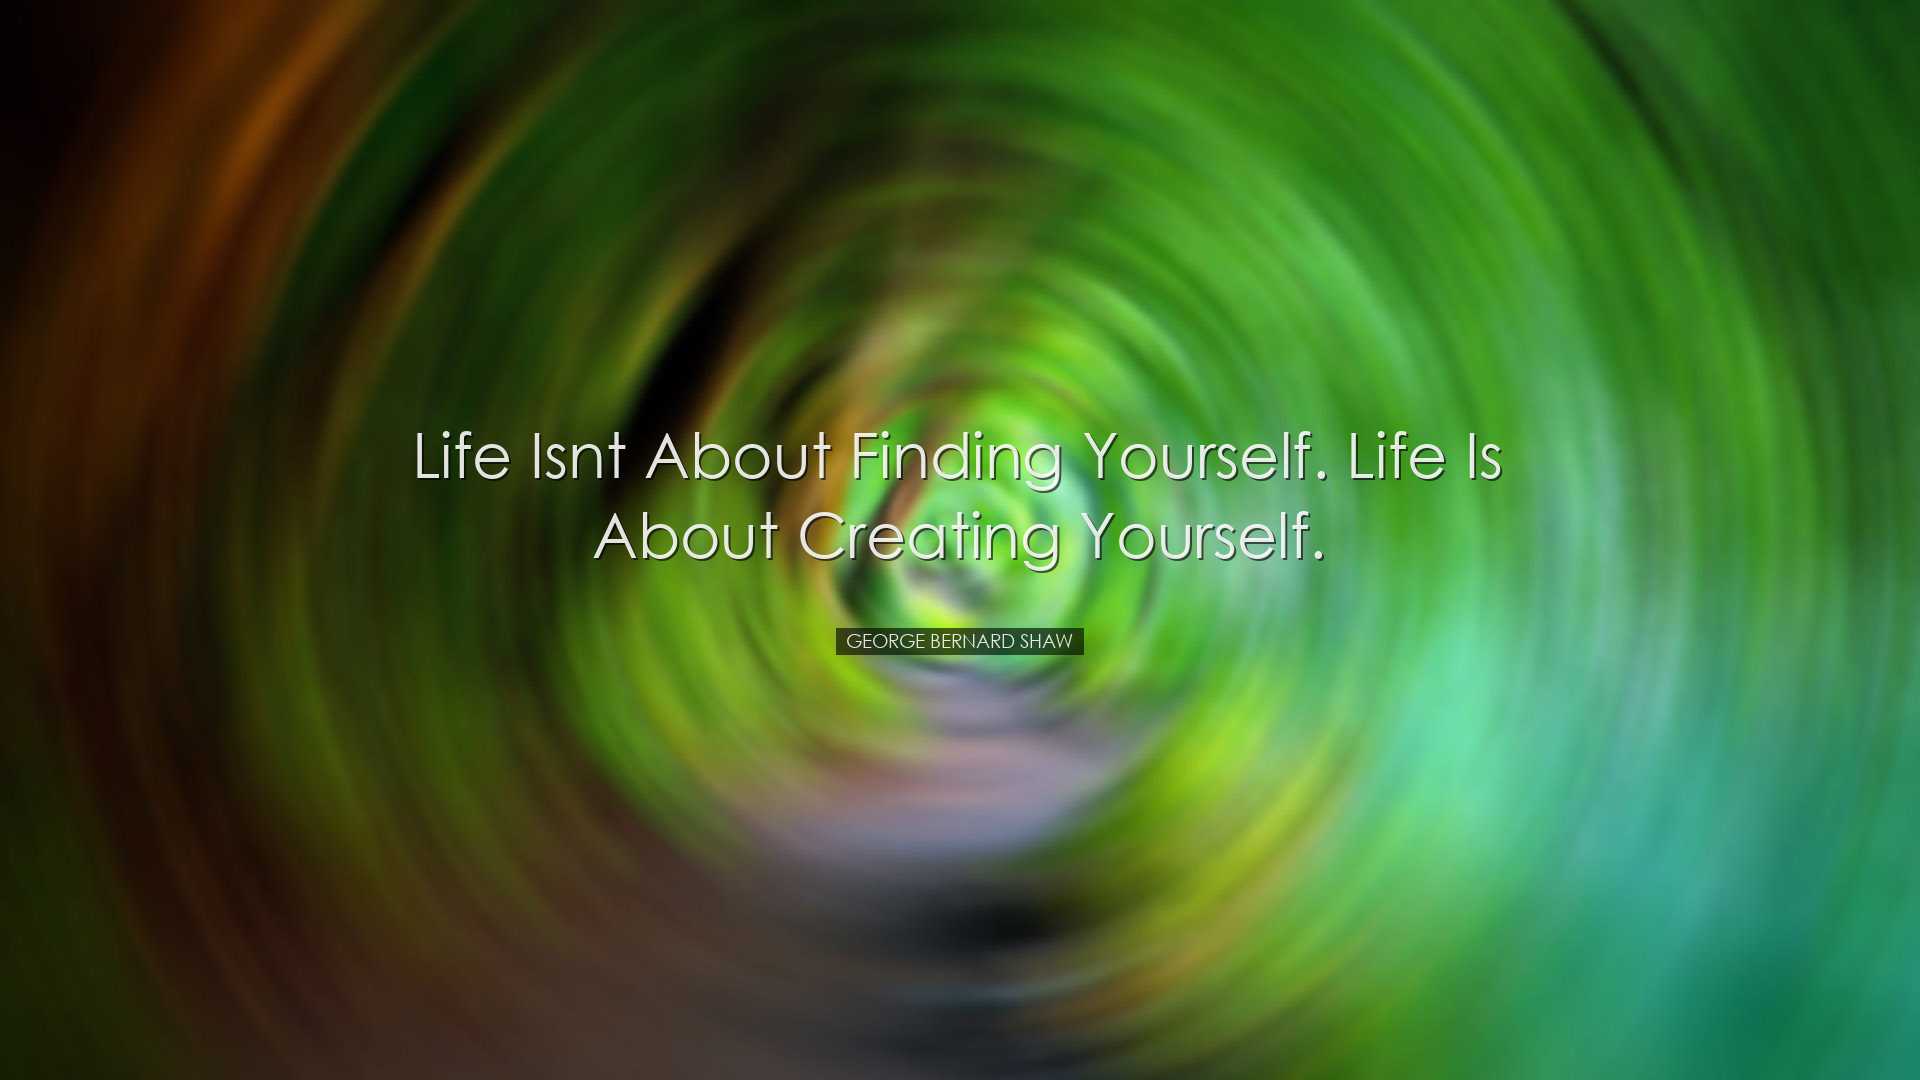 Life isnt about finding yourself. Life is about creating yourself.